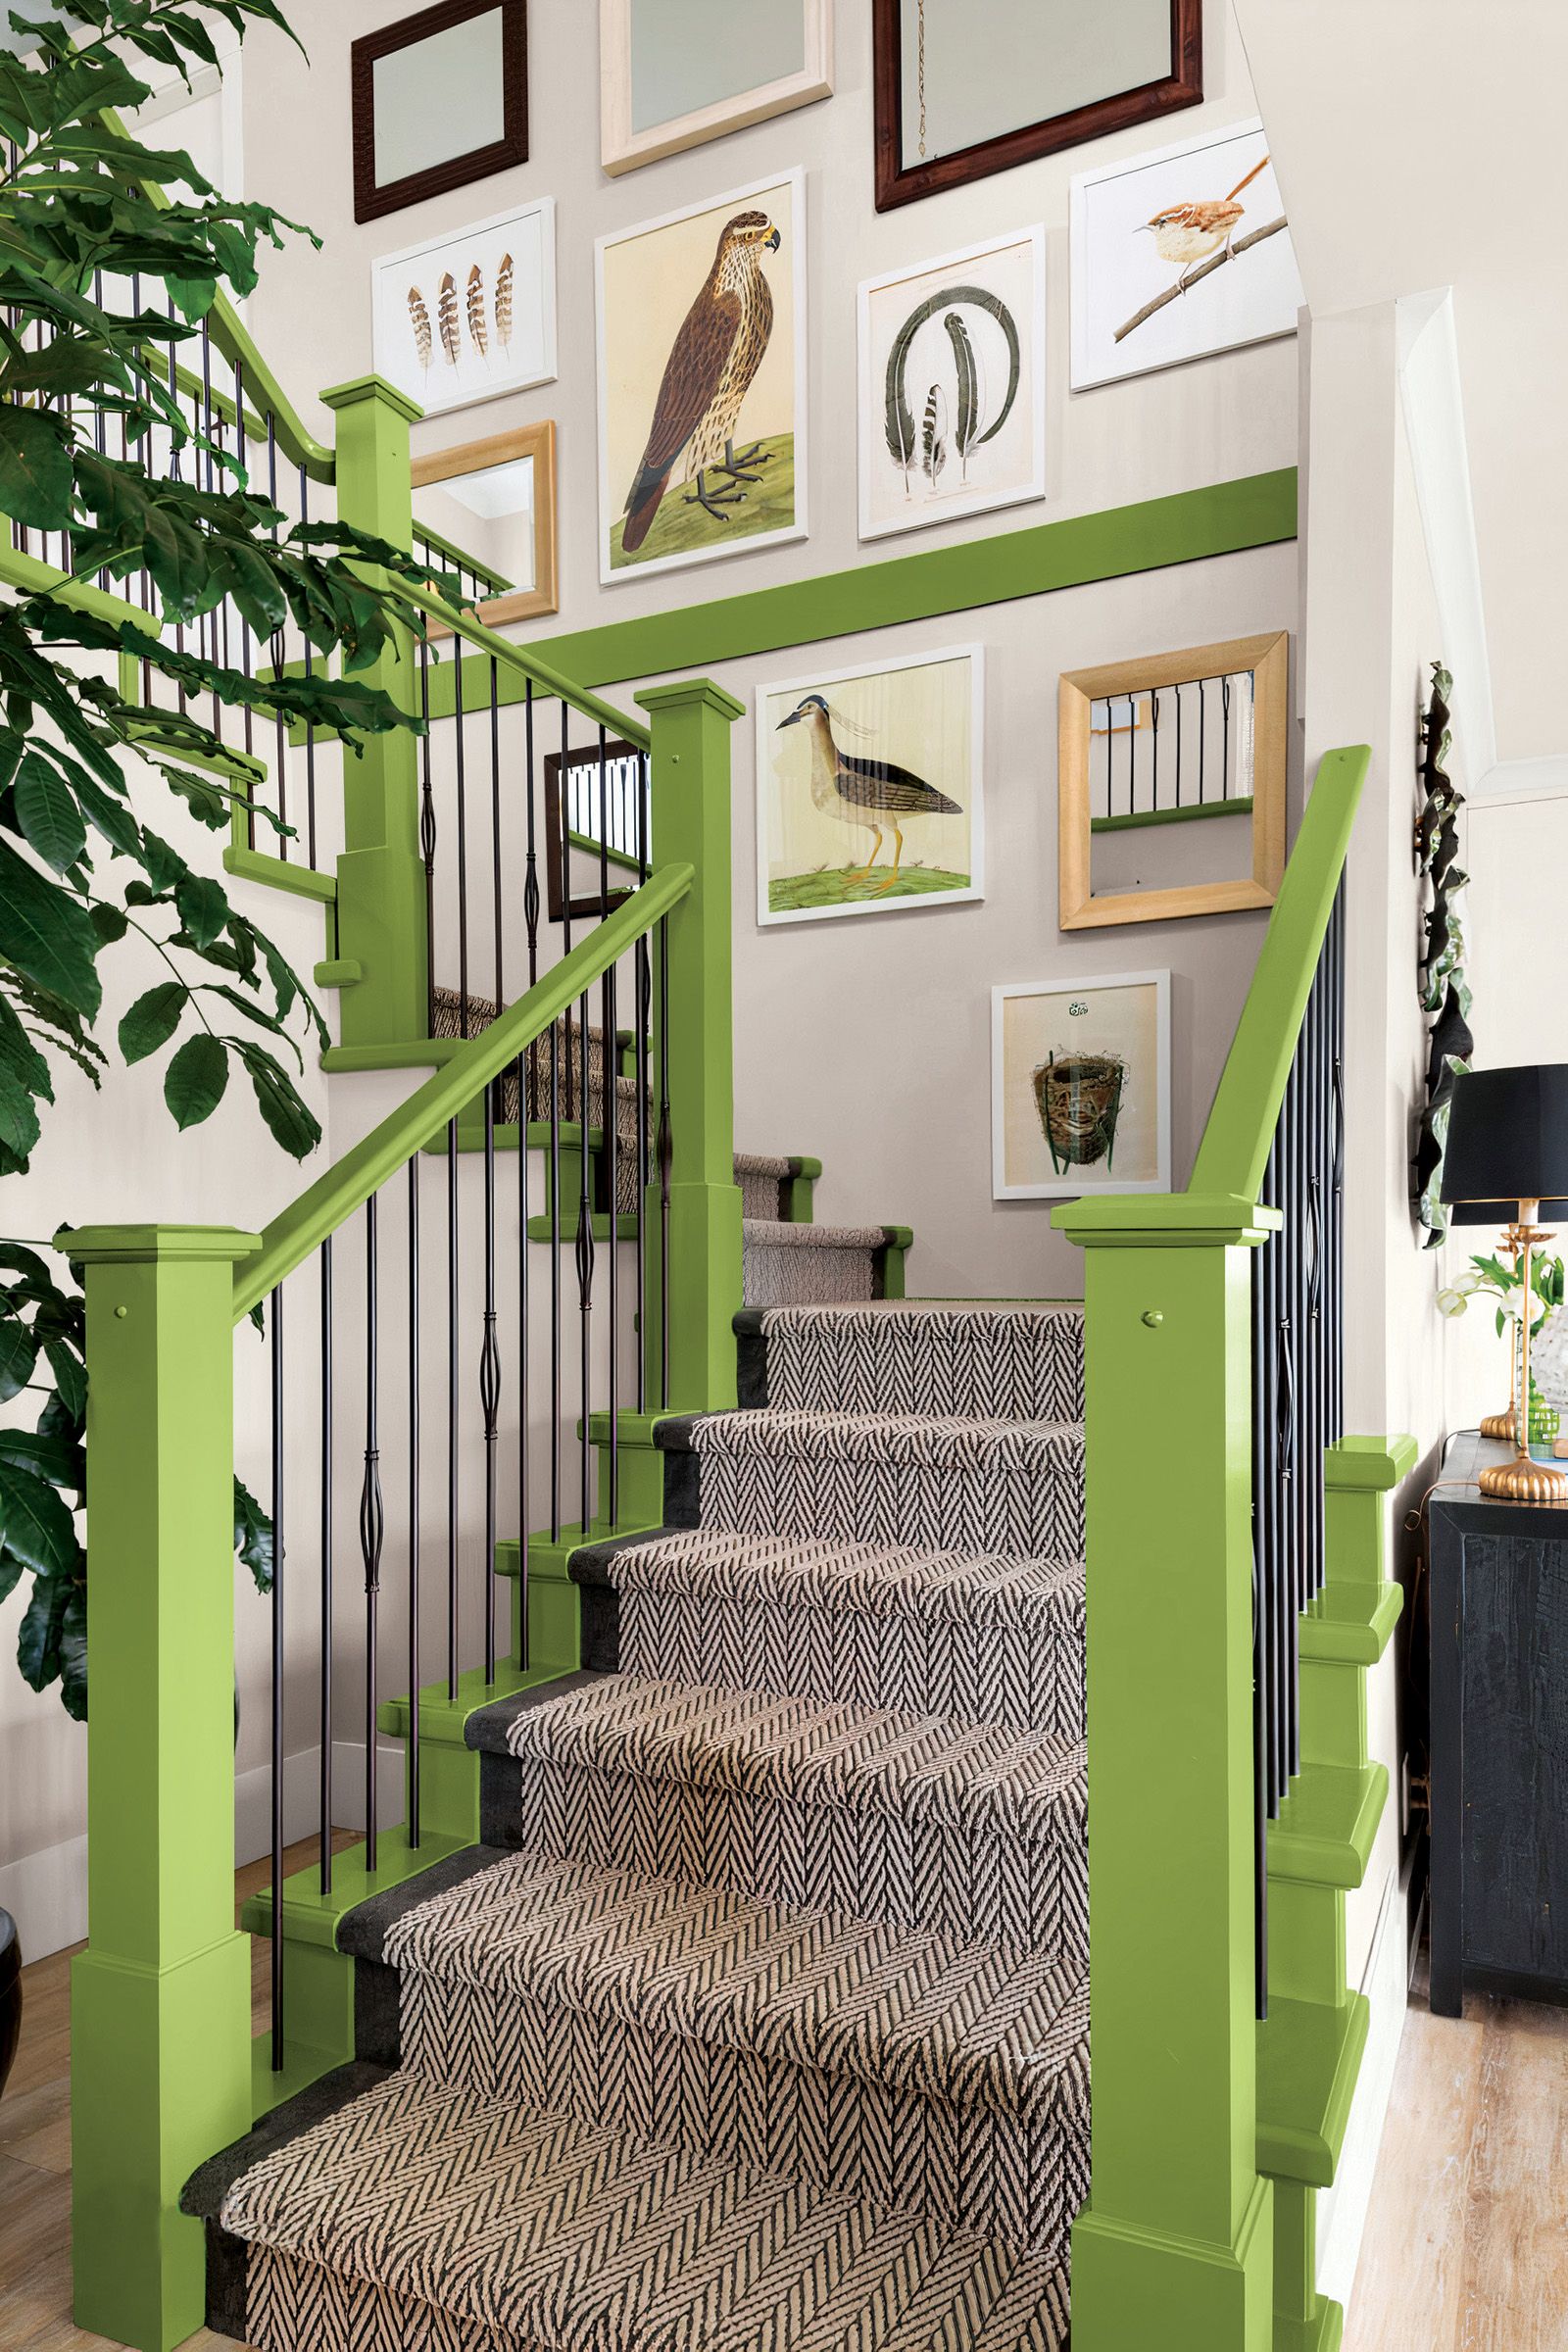 Highly decorative stairway with lime green paint on the banisters